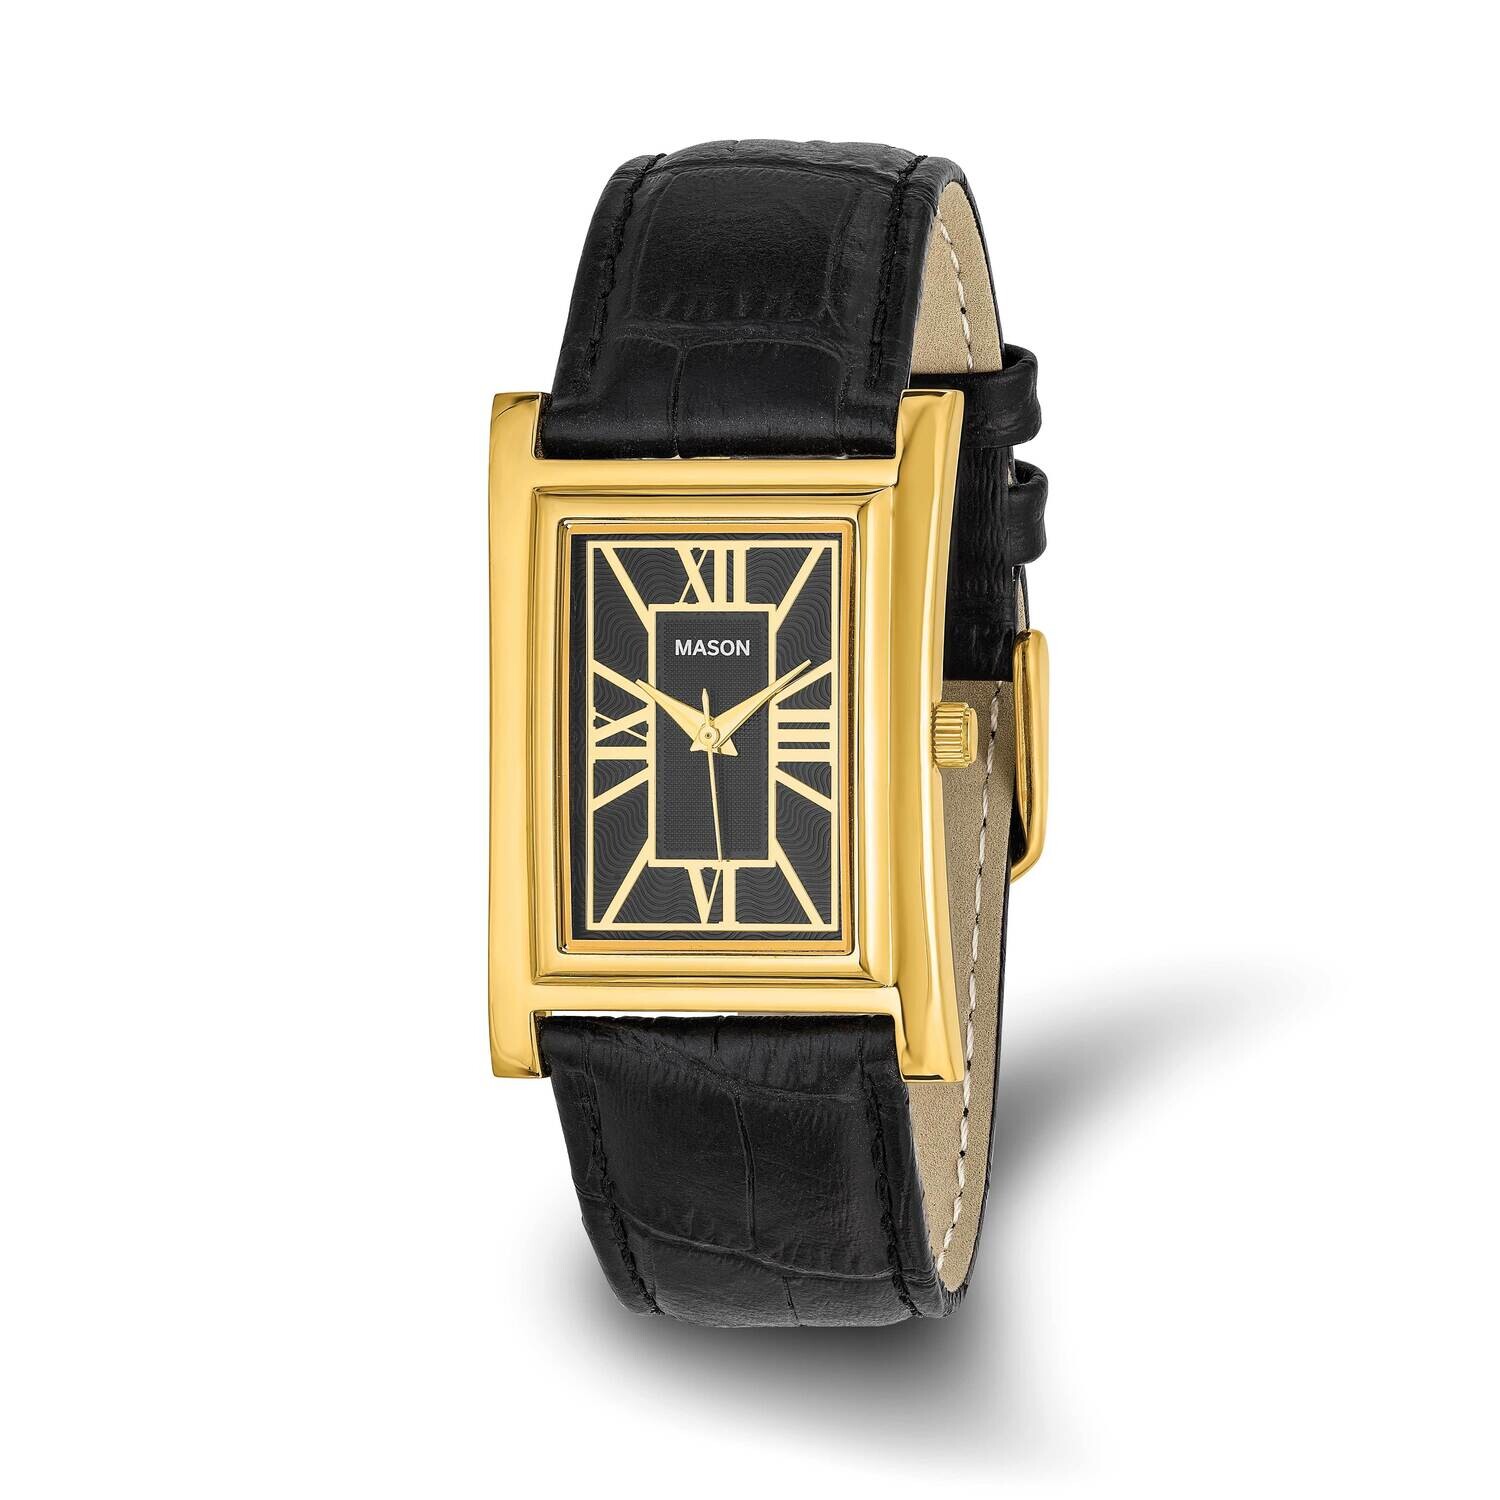 Mason Sales Ladies Gold-Plated Black Leather BWatch Stainless Steel XWA6545